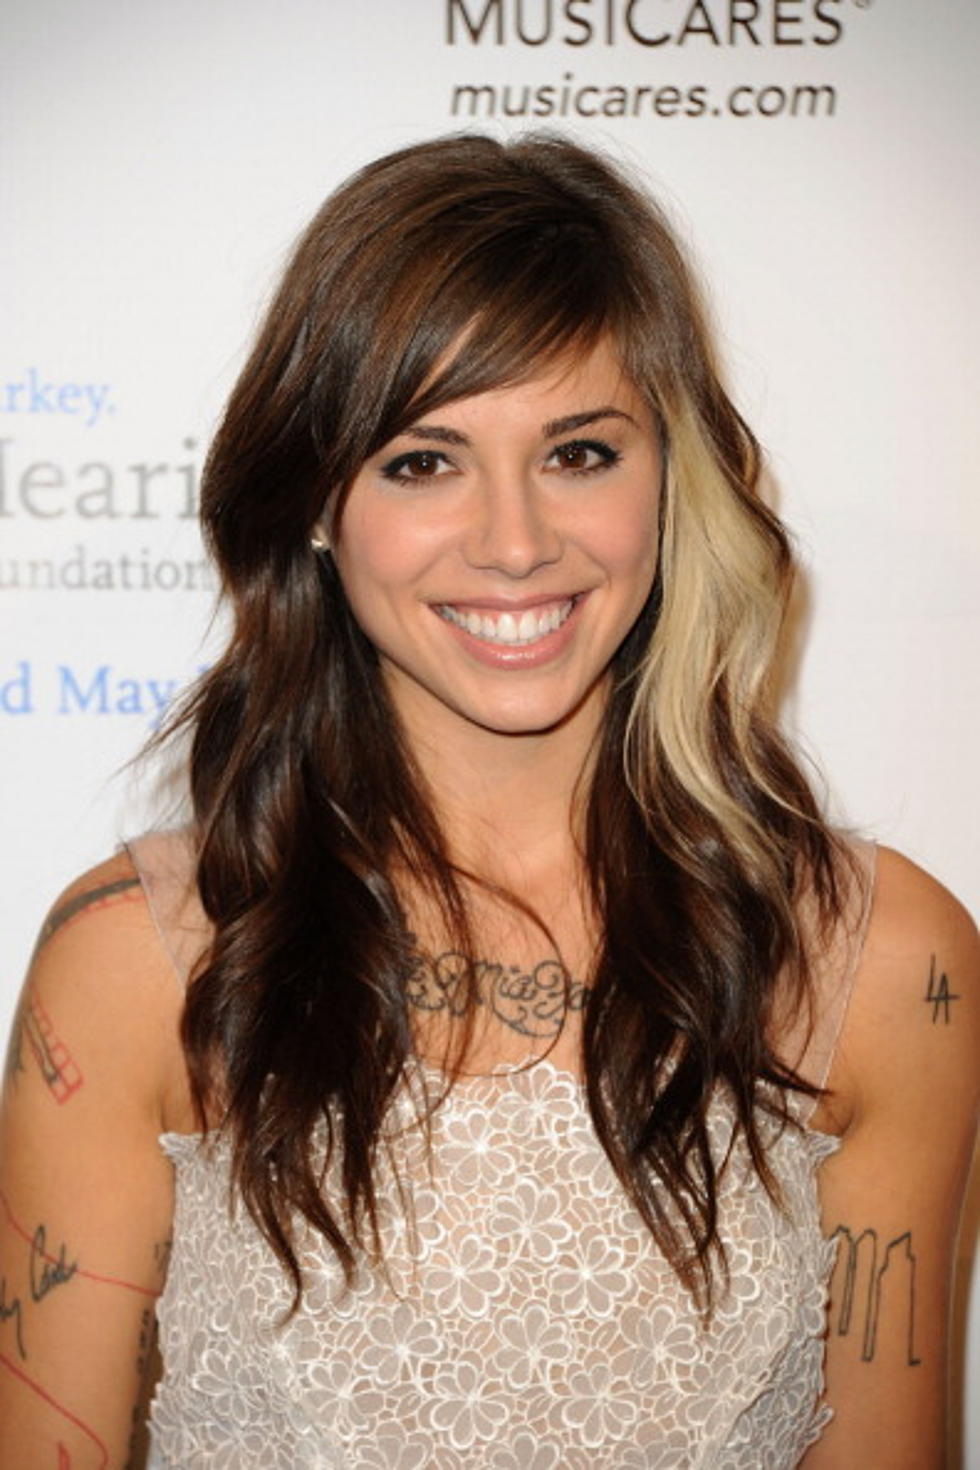 Christina Perri’s Debut Album Due Out In May